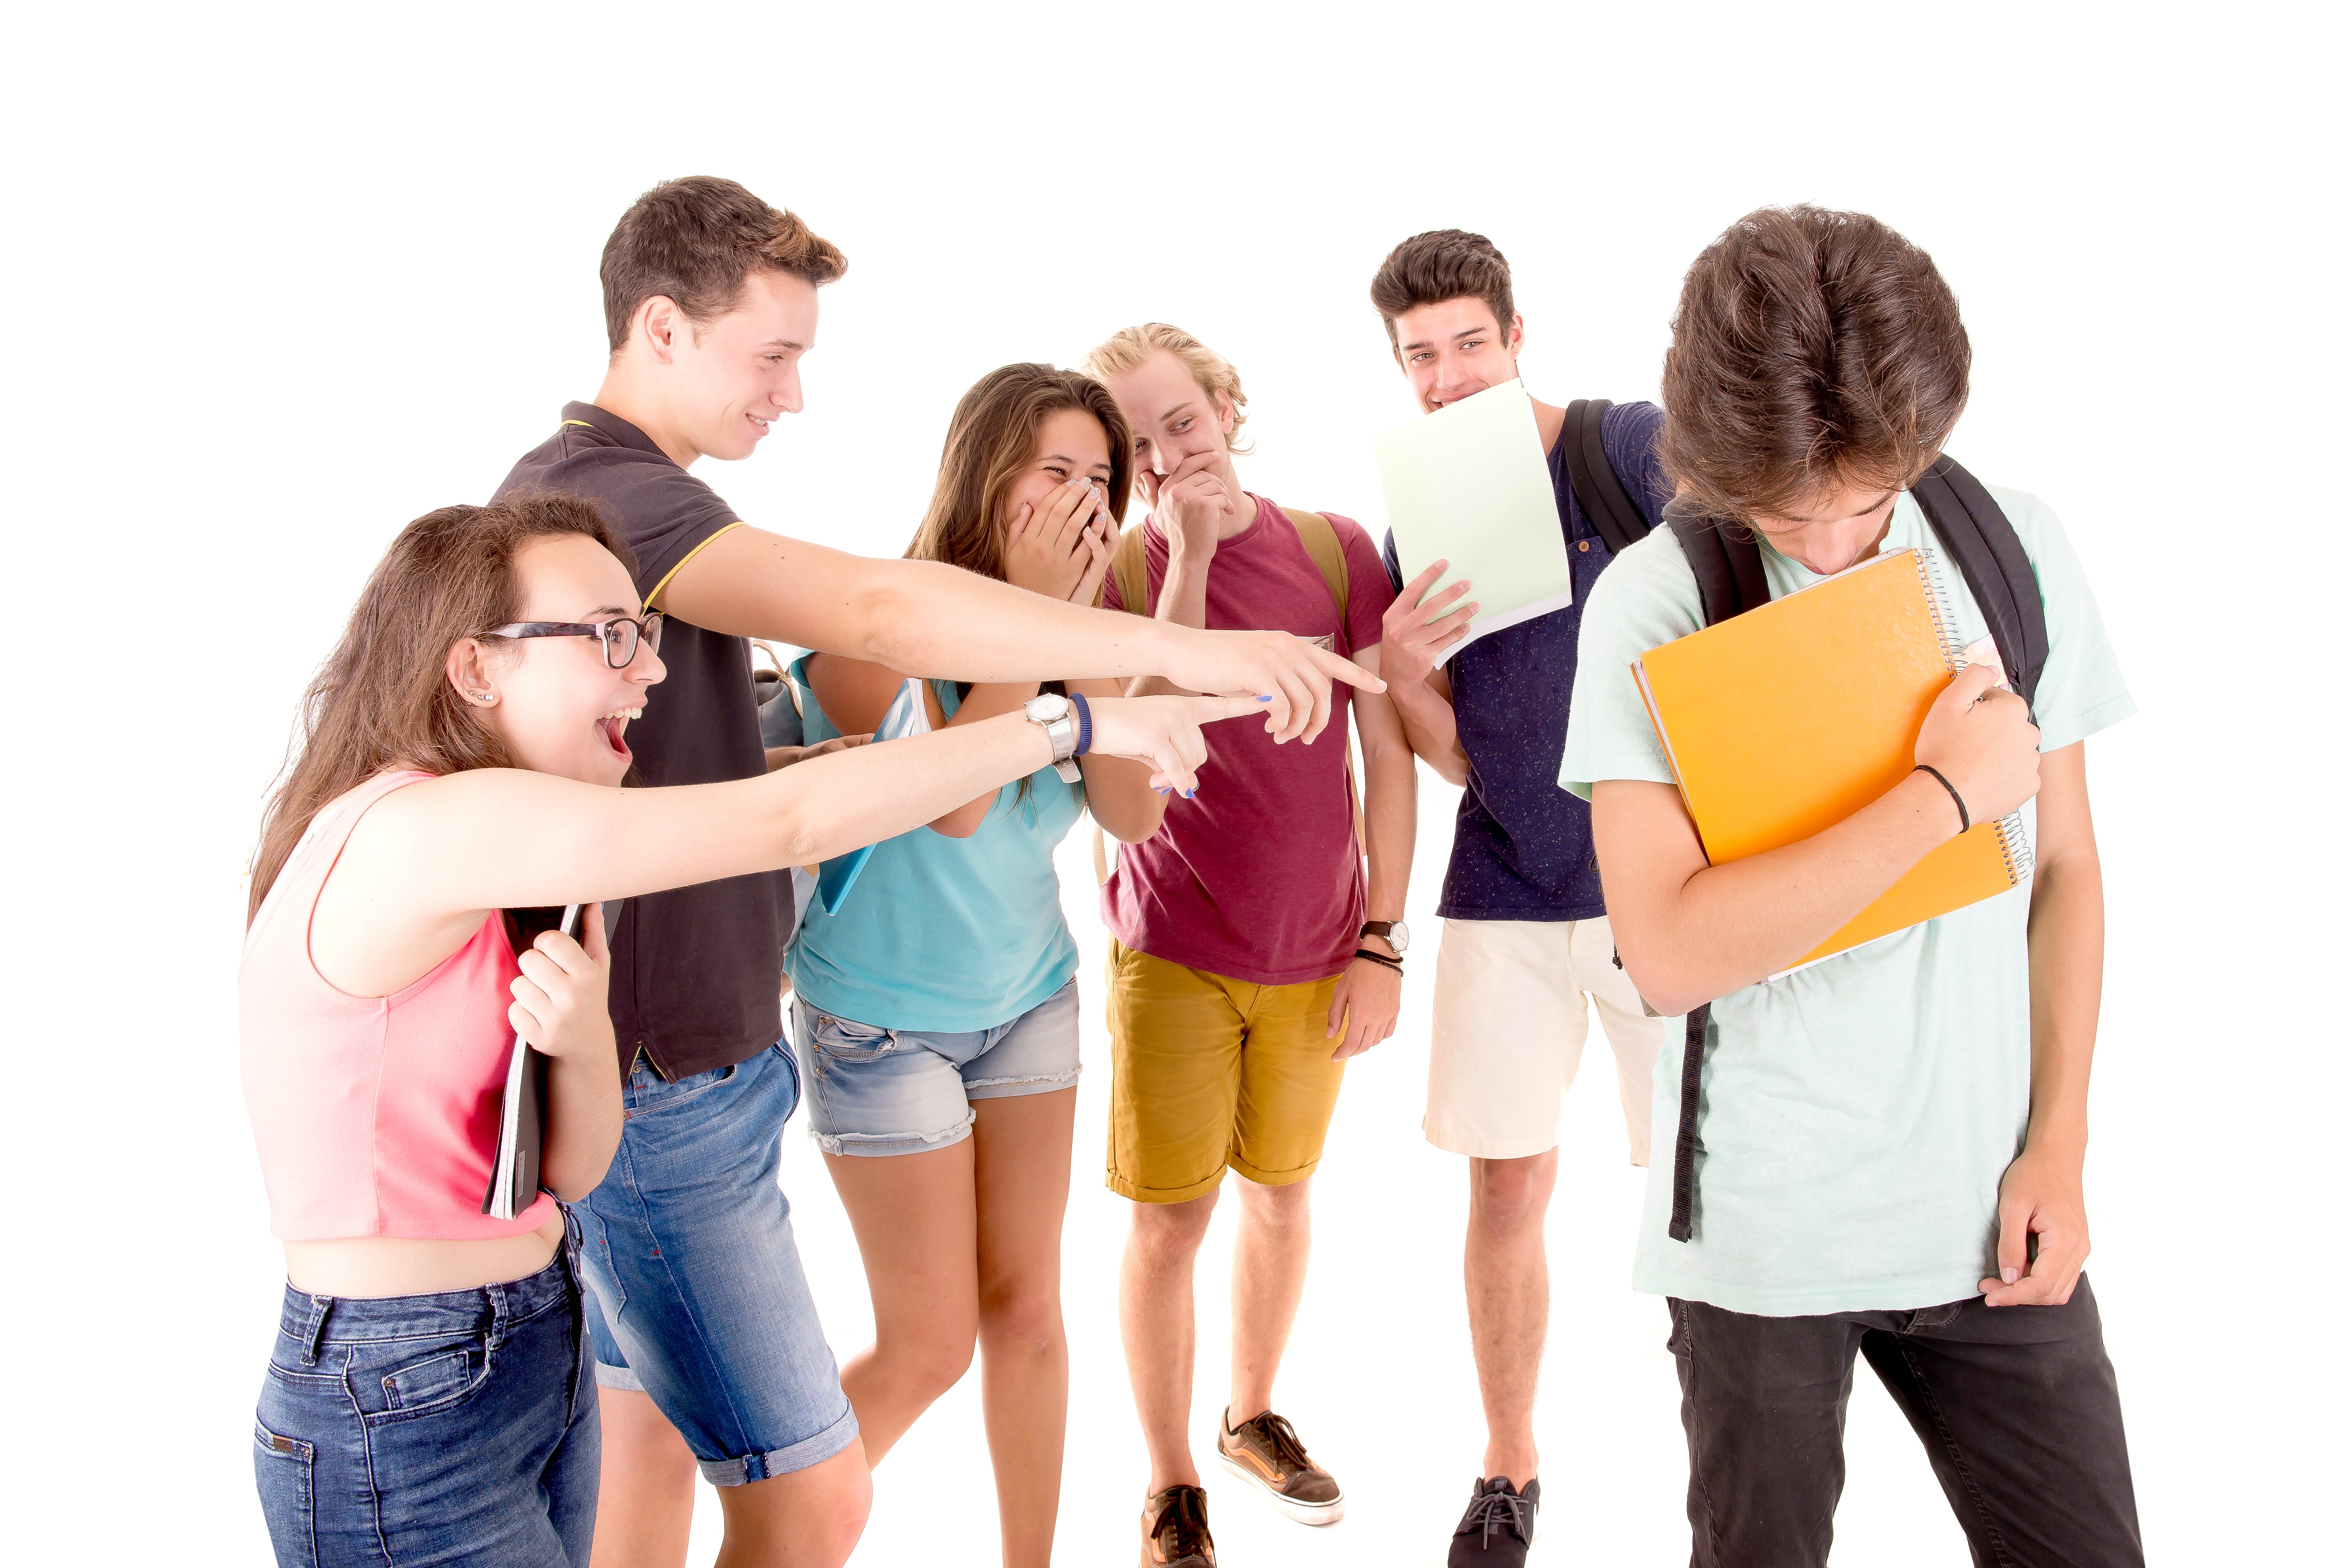 teenagers bullying another isolated in white